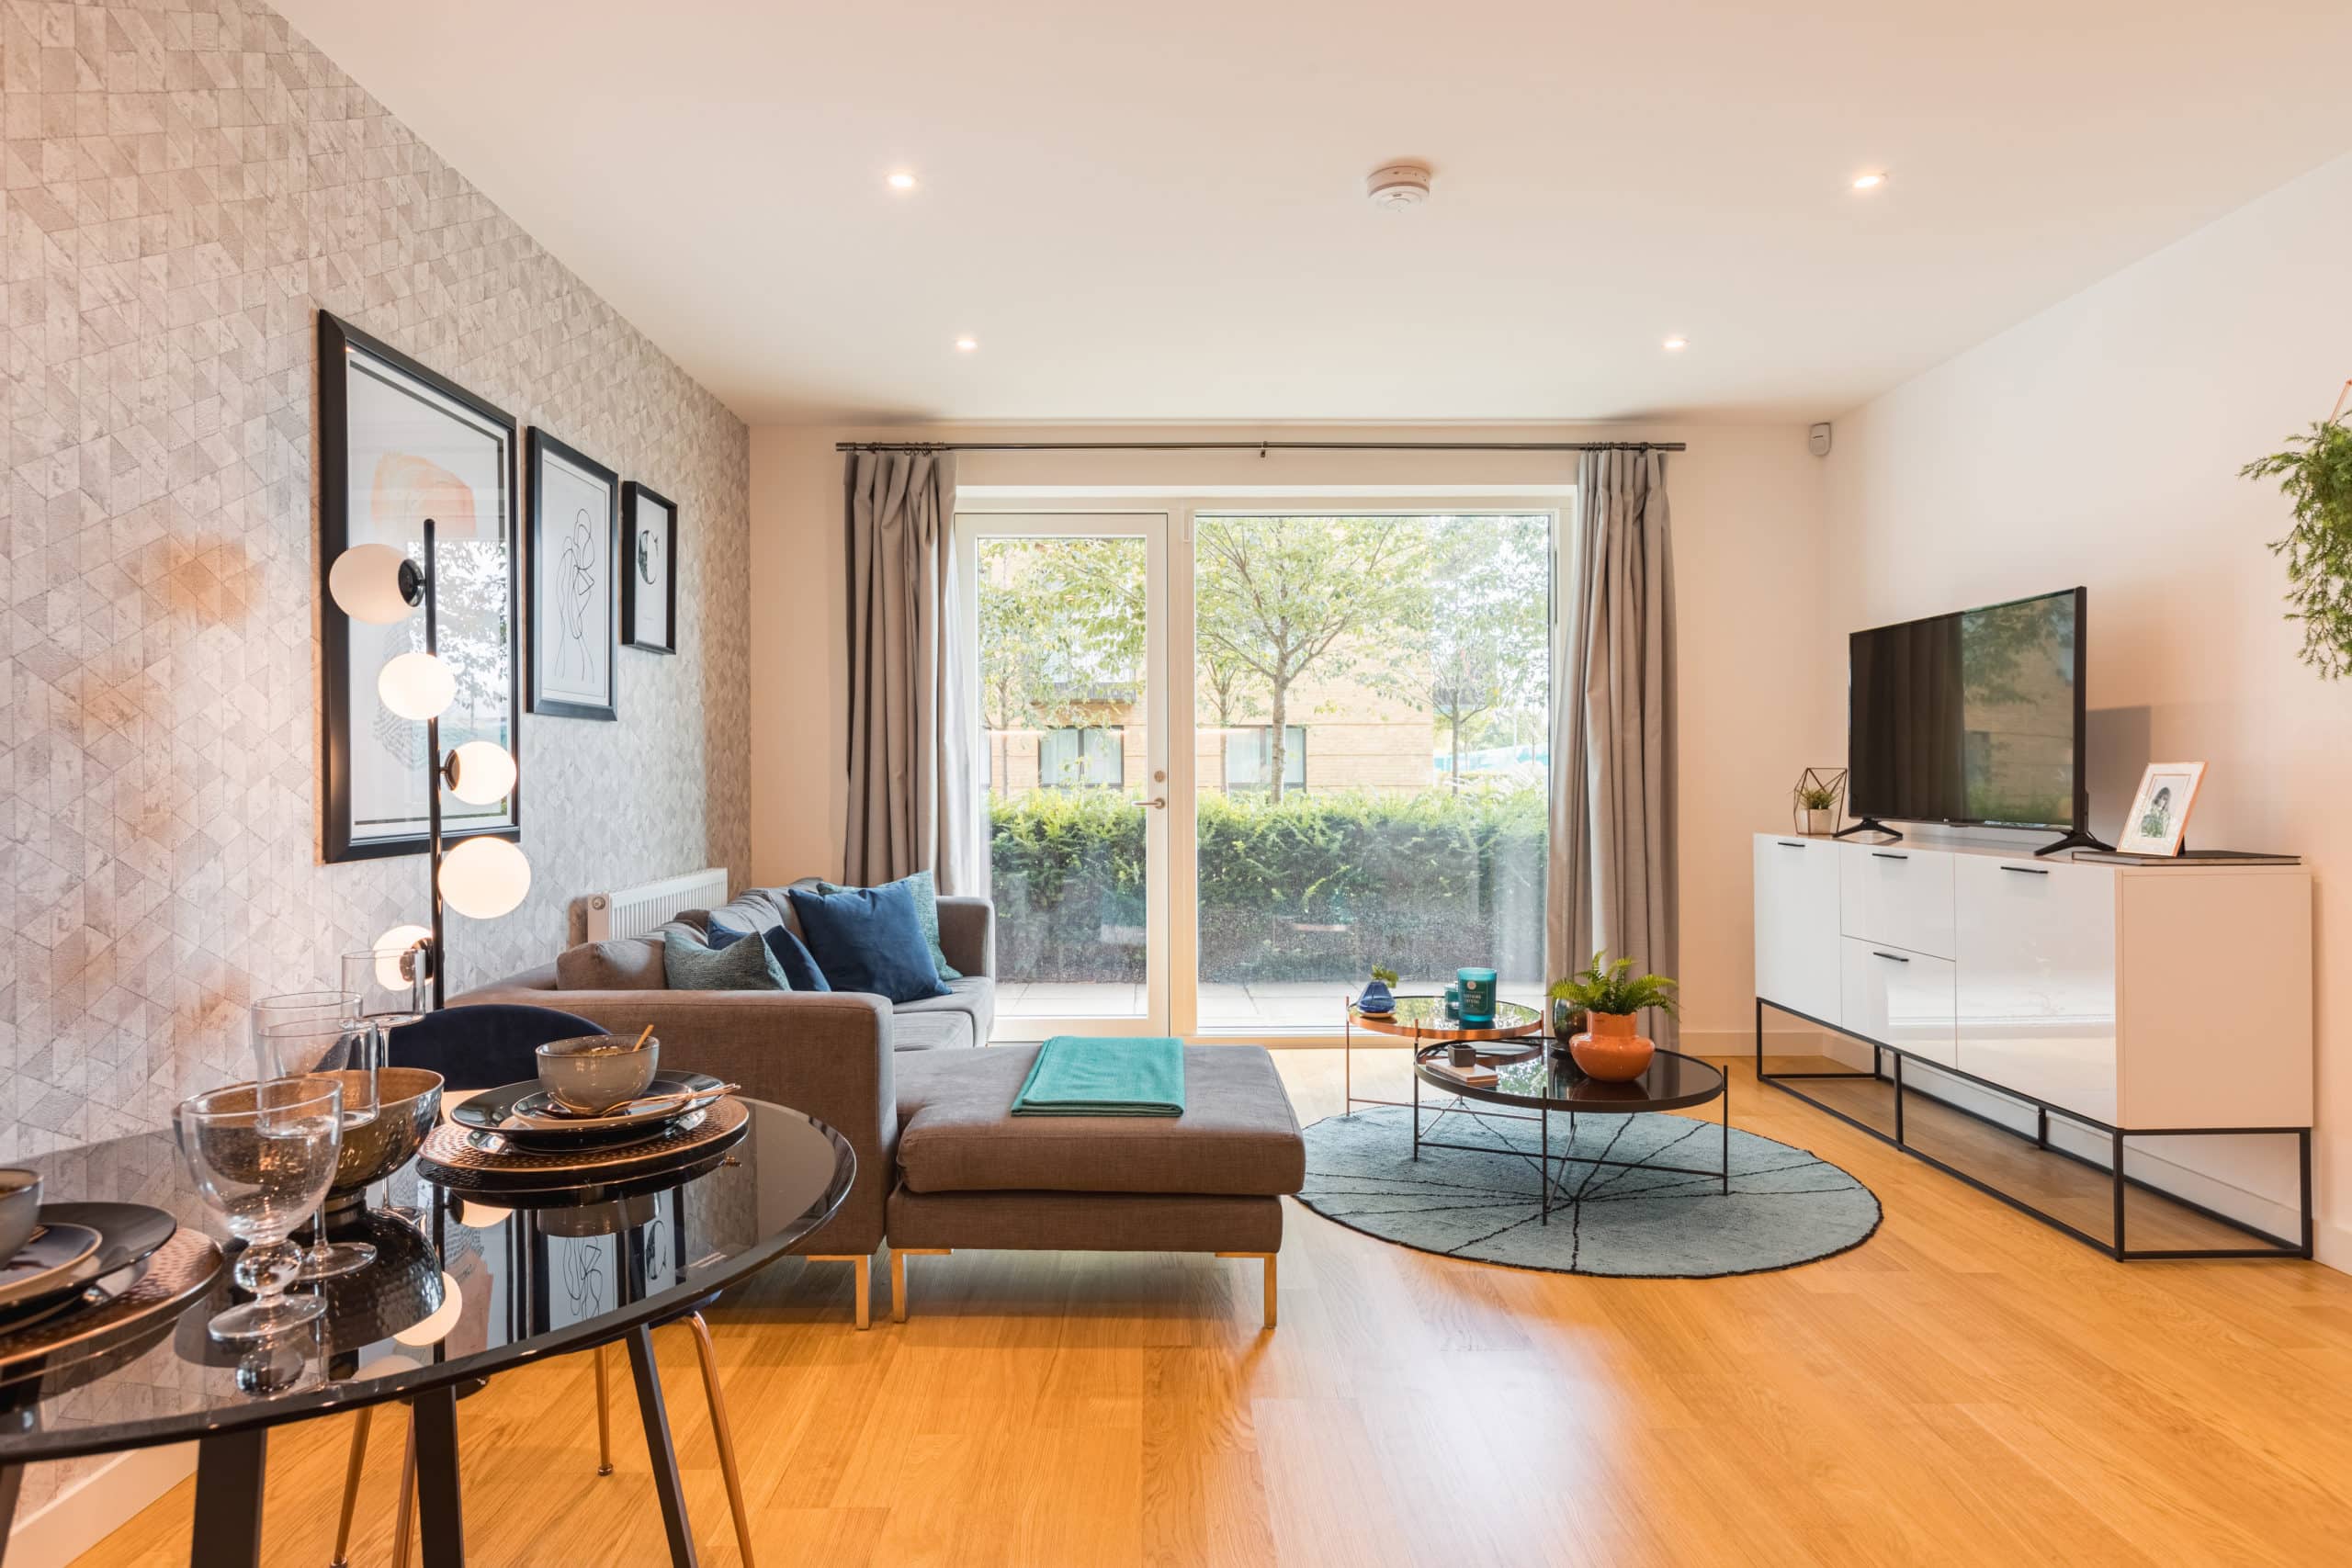 Internal photography of ARRO by Catalyst - Shared Ownership homes available on Share to Buy